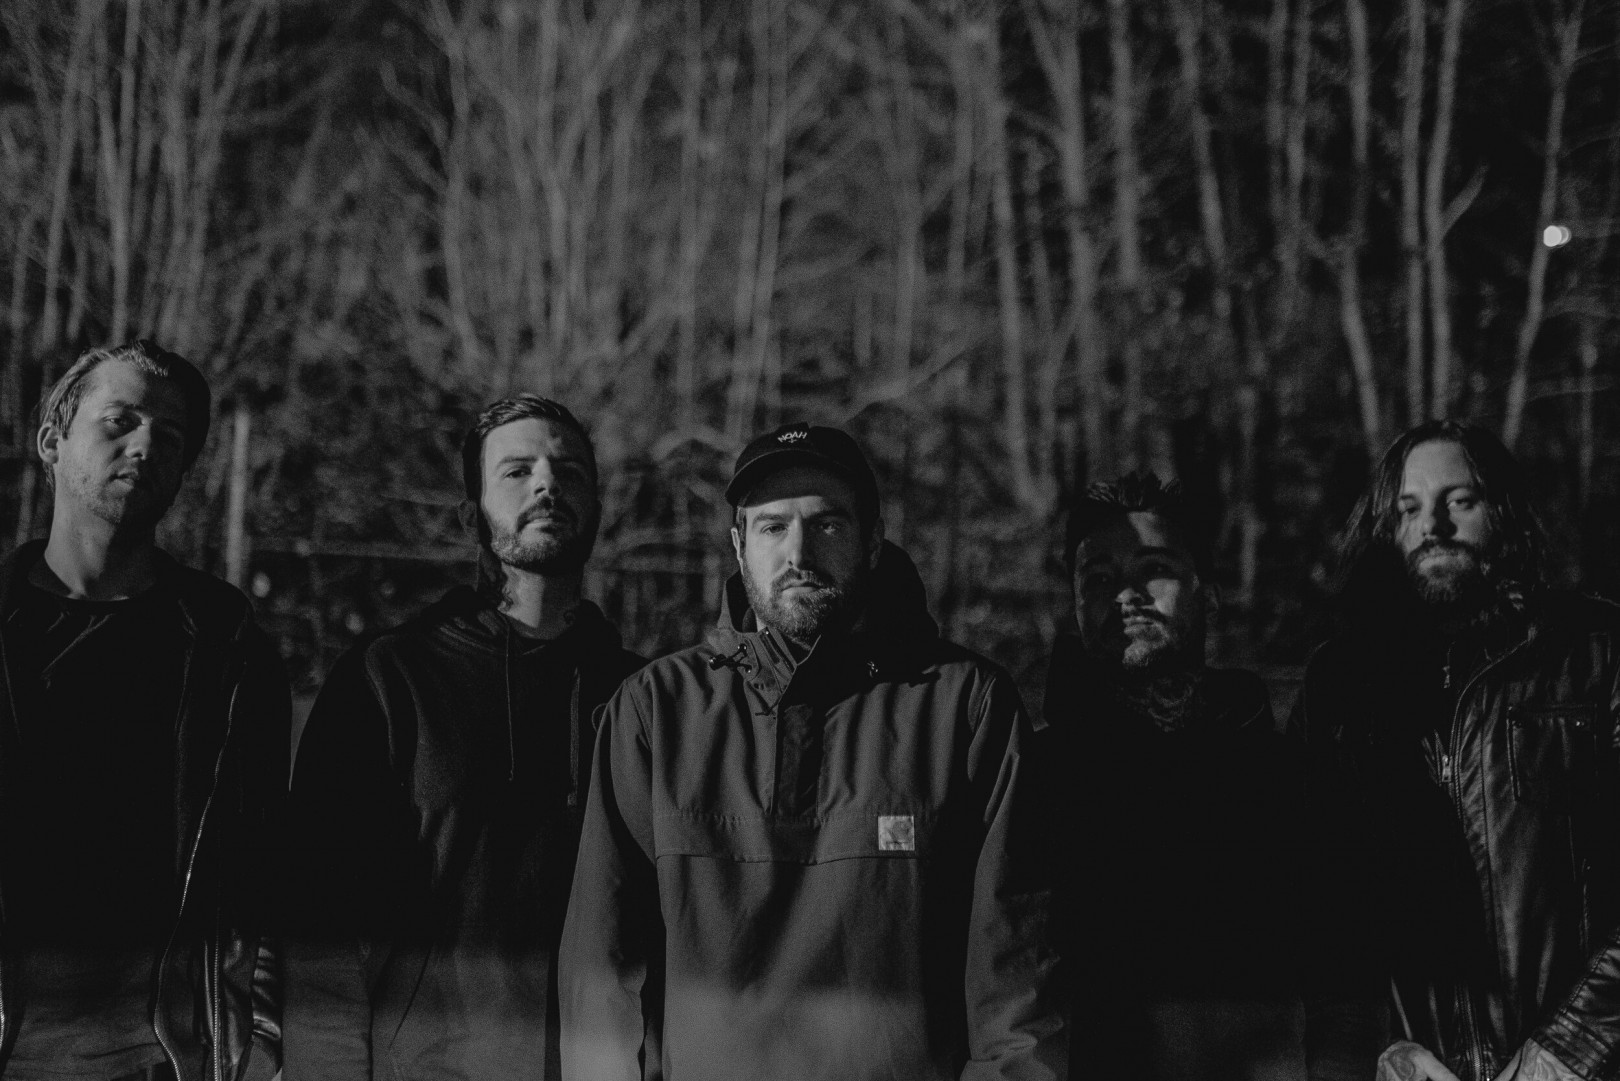 END announce new album, release video for "Gaping Wounds Of Earth"